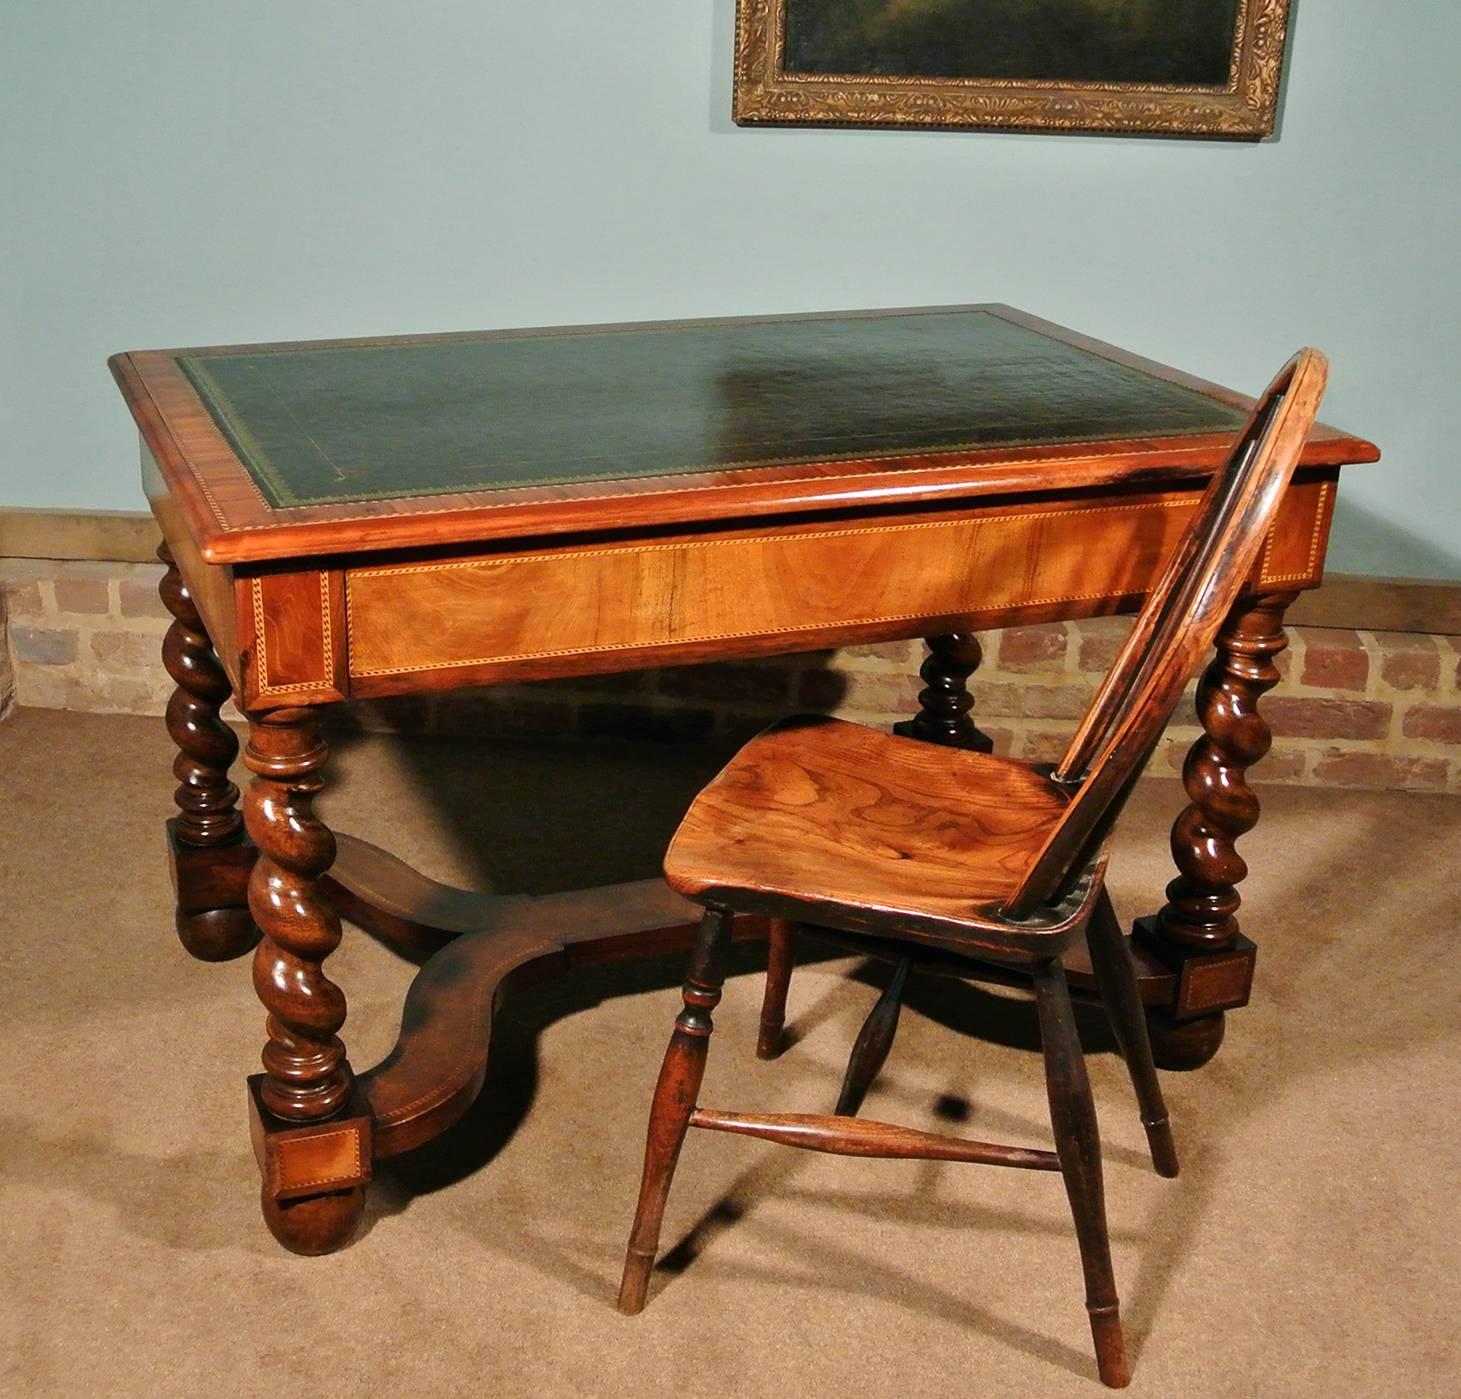 A superior quality writing desk of small proportion and with a beautiful rich color to the walnut. 

The desk dates from circa 1900 and has a deep navy leather skiver in very good condition with a lovely gold tooled border. The single wide drawer